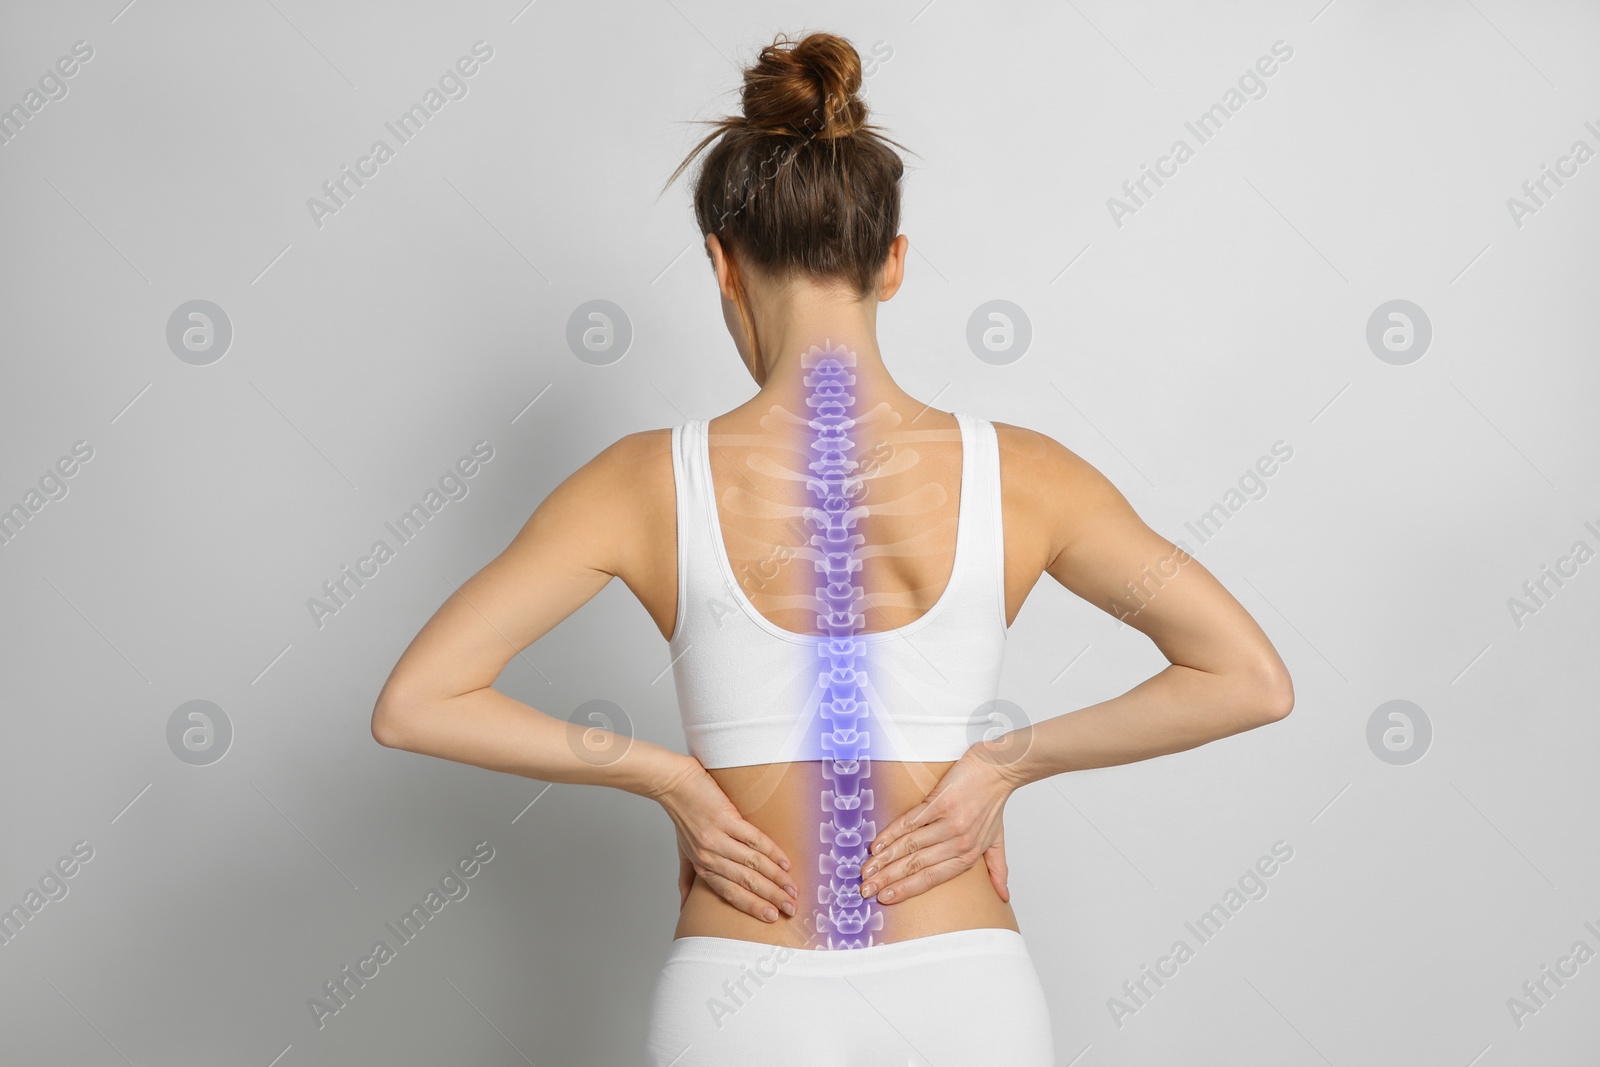 Image of Woman with healthy spine on light background, back view